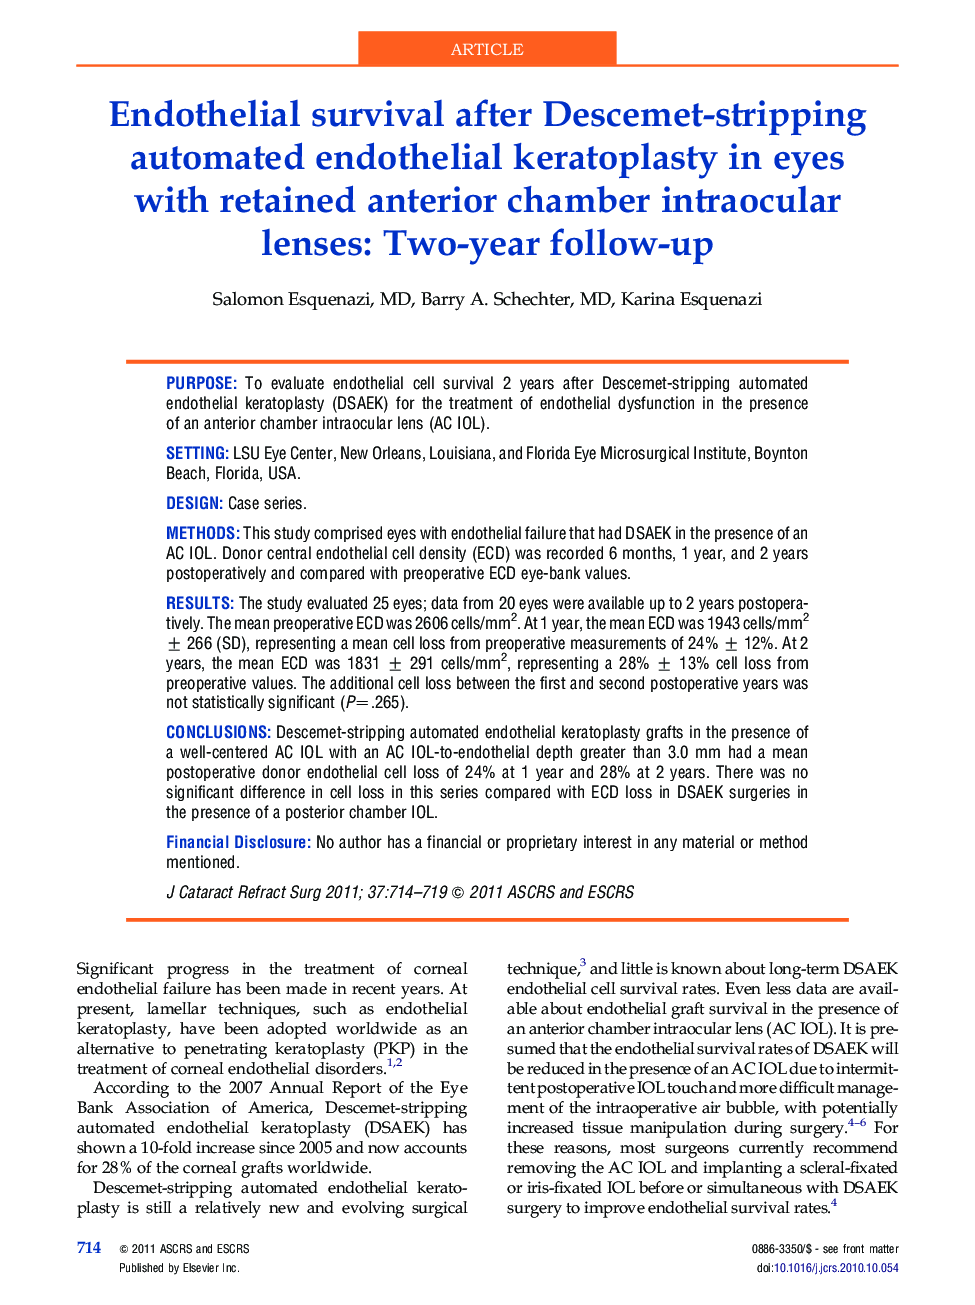 Endothelial survival after Descemet-stripping automated endothelial keratoplasty in eyes with retained anterior chamber intraocular lenses: Two-year follow-up